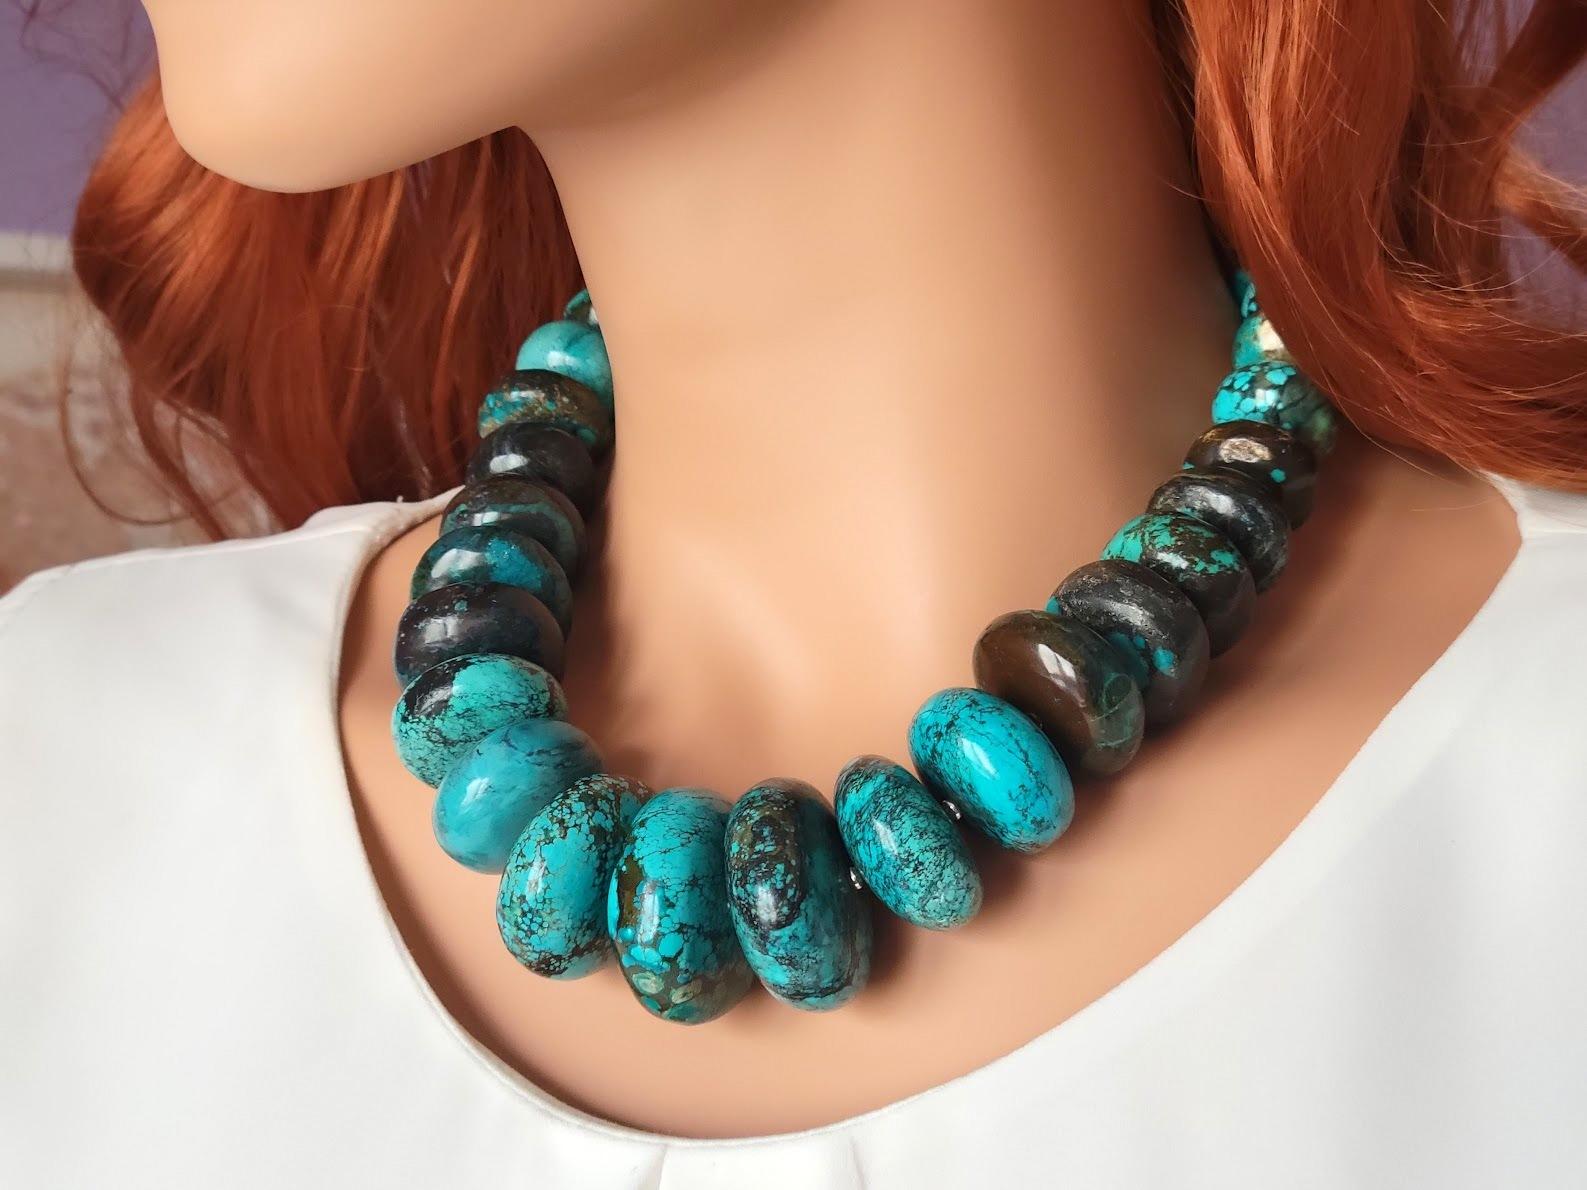 The length of the necklace is 19 inches (48 cm).
The size of the rondelle beads varies from 16 mm to 33.5 mm.
Turquoise ranges in color from a light shade of green to light blue to a beautiful dark blue. Turquoise beads have a dark brown or black